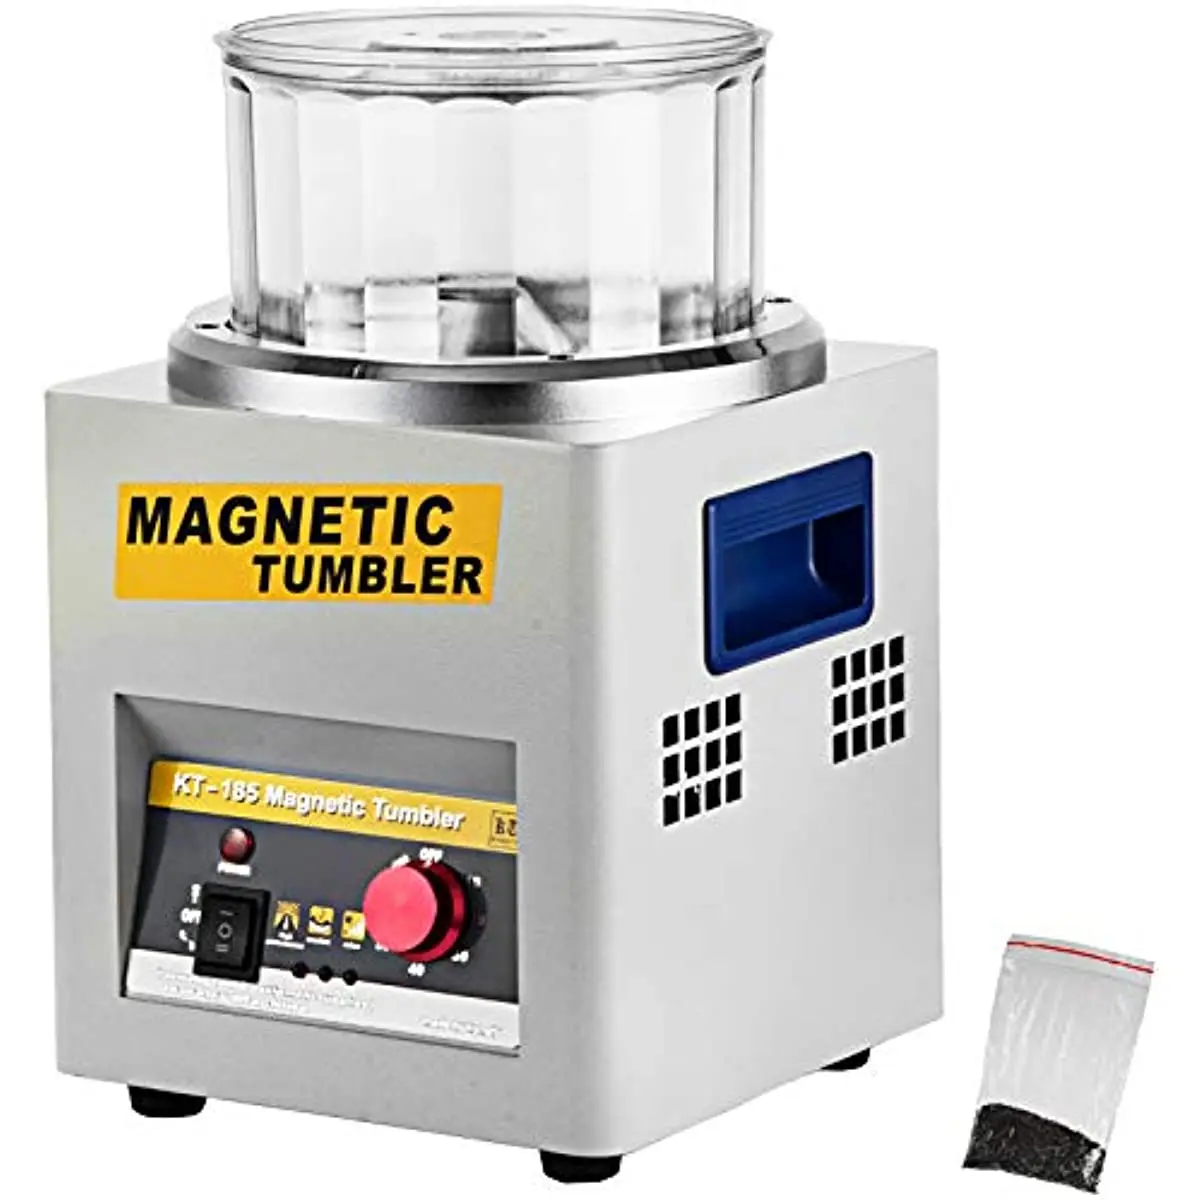 Magnetic Tumbler jewelry Polisher 2000 RPM Finisher  Polisher 3.3 LBS Capacity 1-60 min Time Control for Jewelry (KT185)